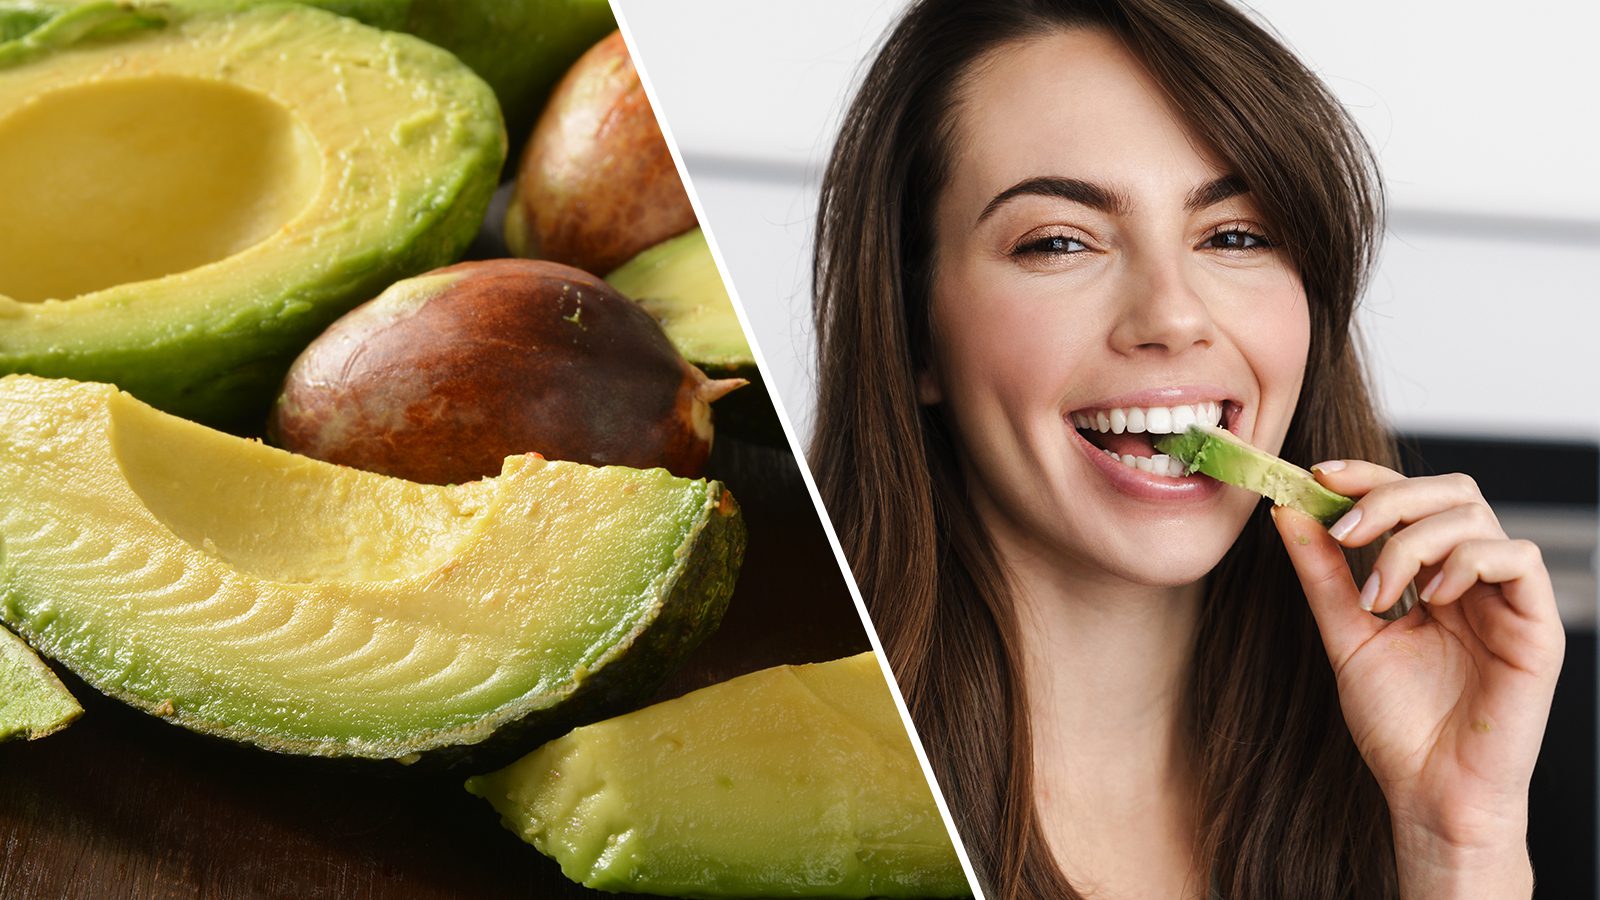 Study Explains Why Avocado Helps A Healthy Diet